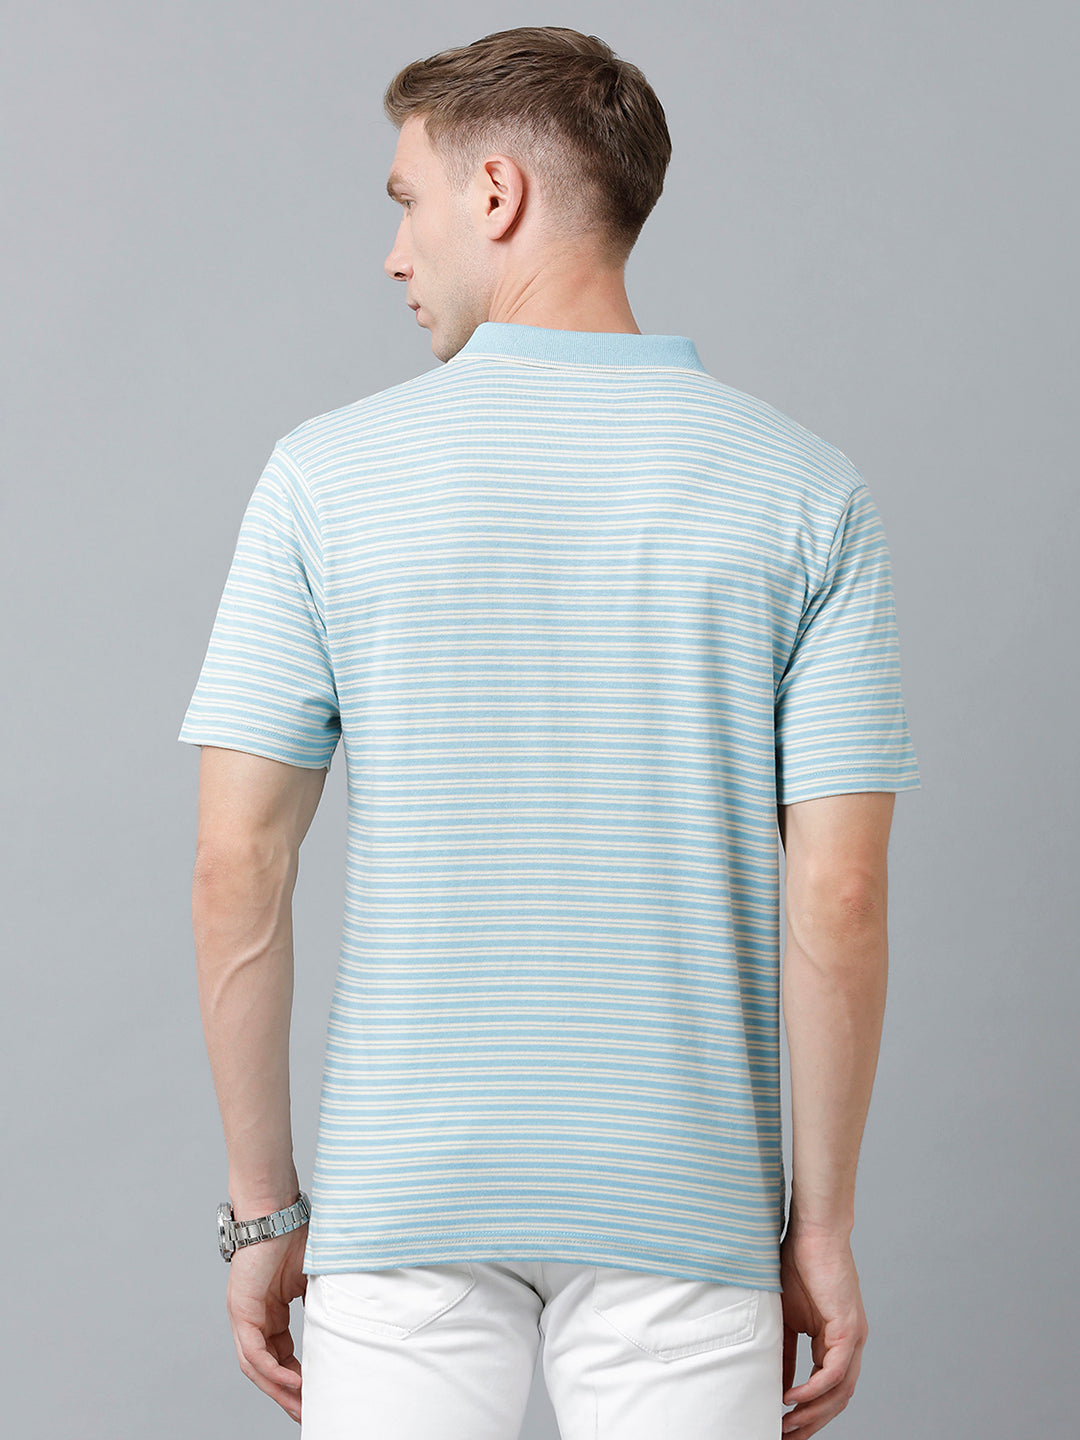 Classic Polo Men's Cotton Half Sleeve Striped Authentic Fit Polo Neck Sky Blue Color T-Shirt | Feeders - 212 B